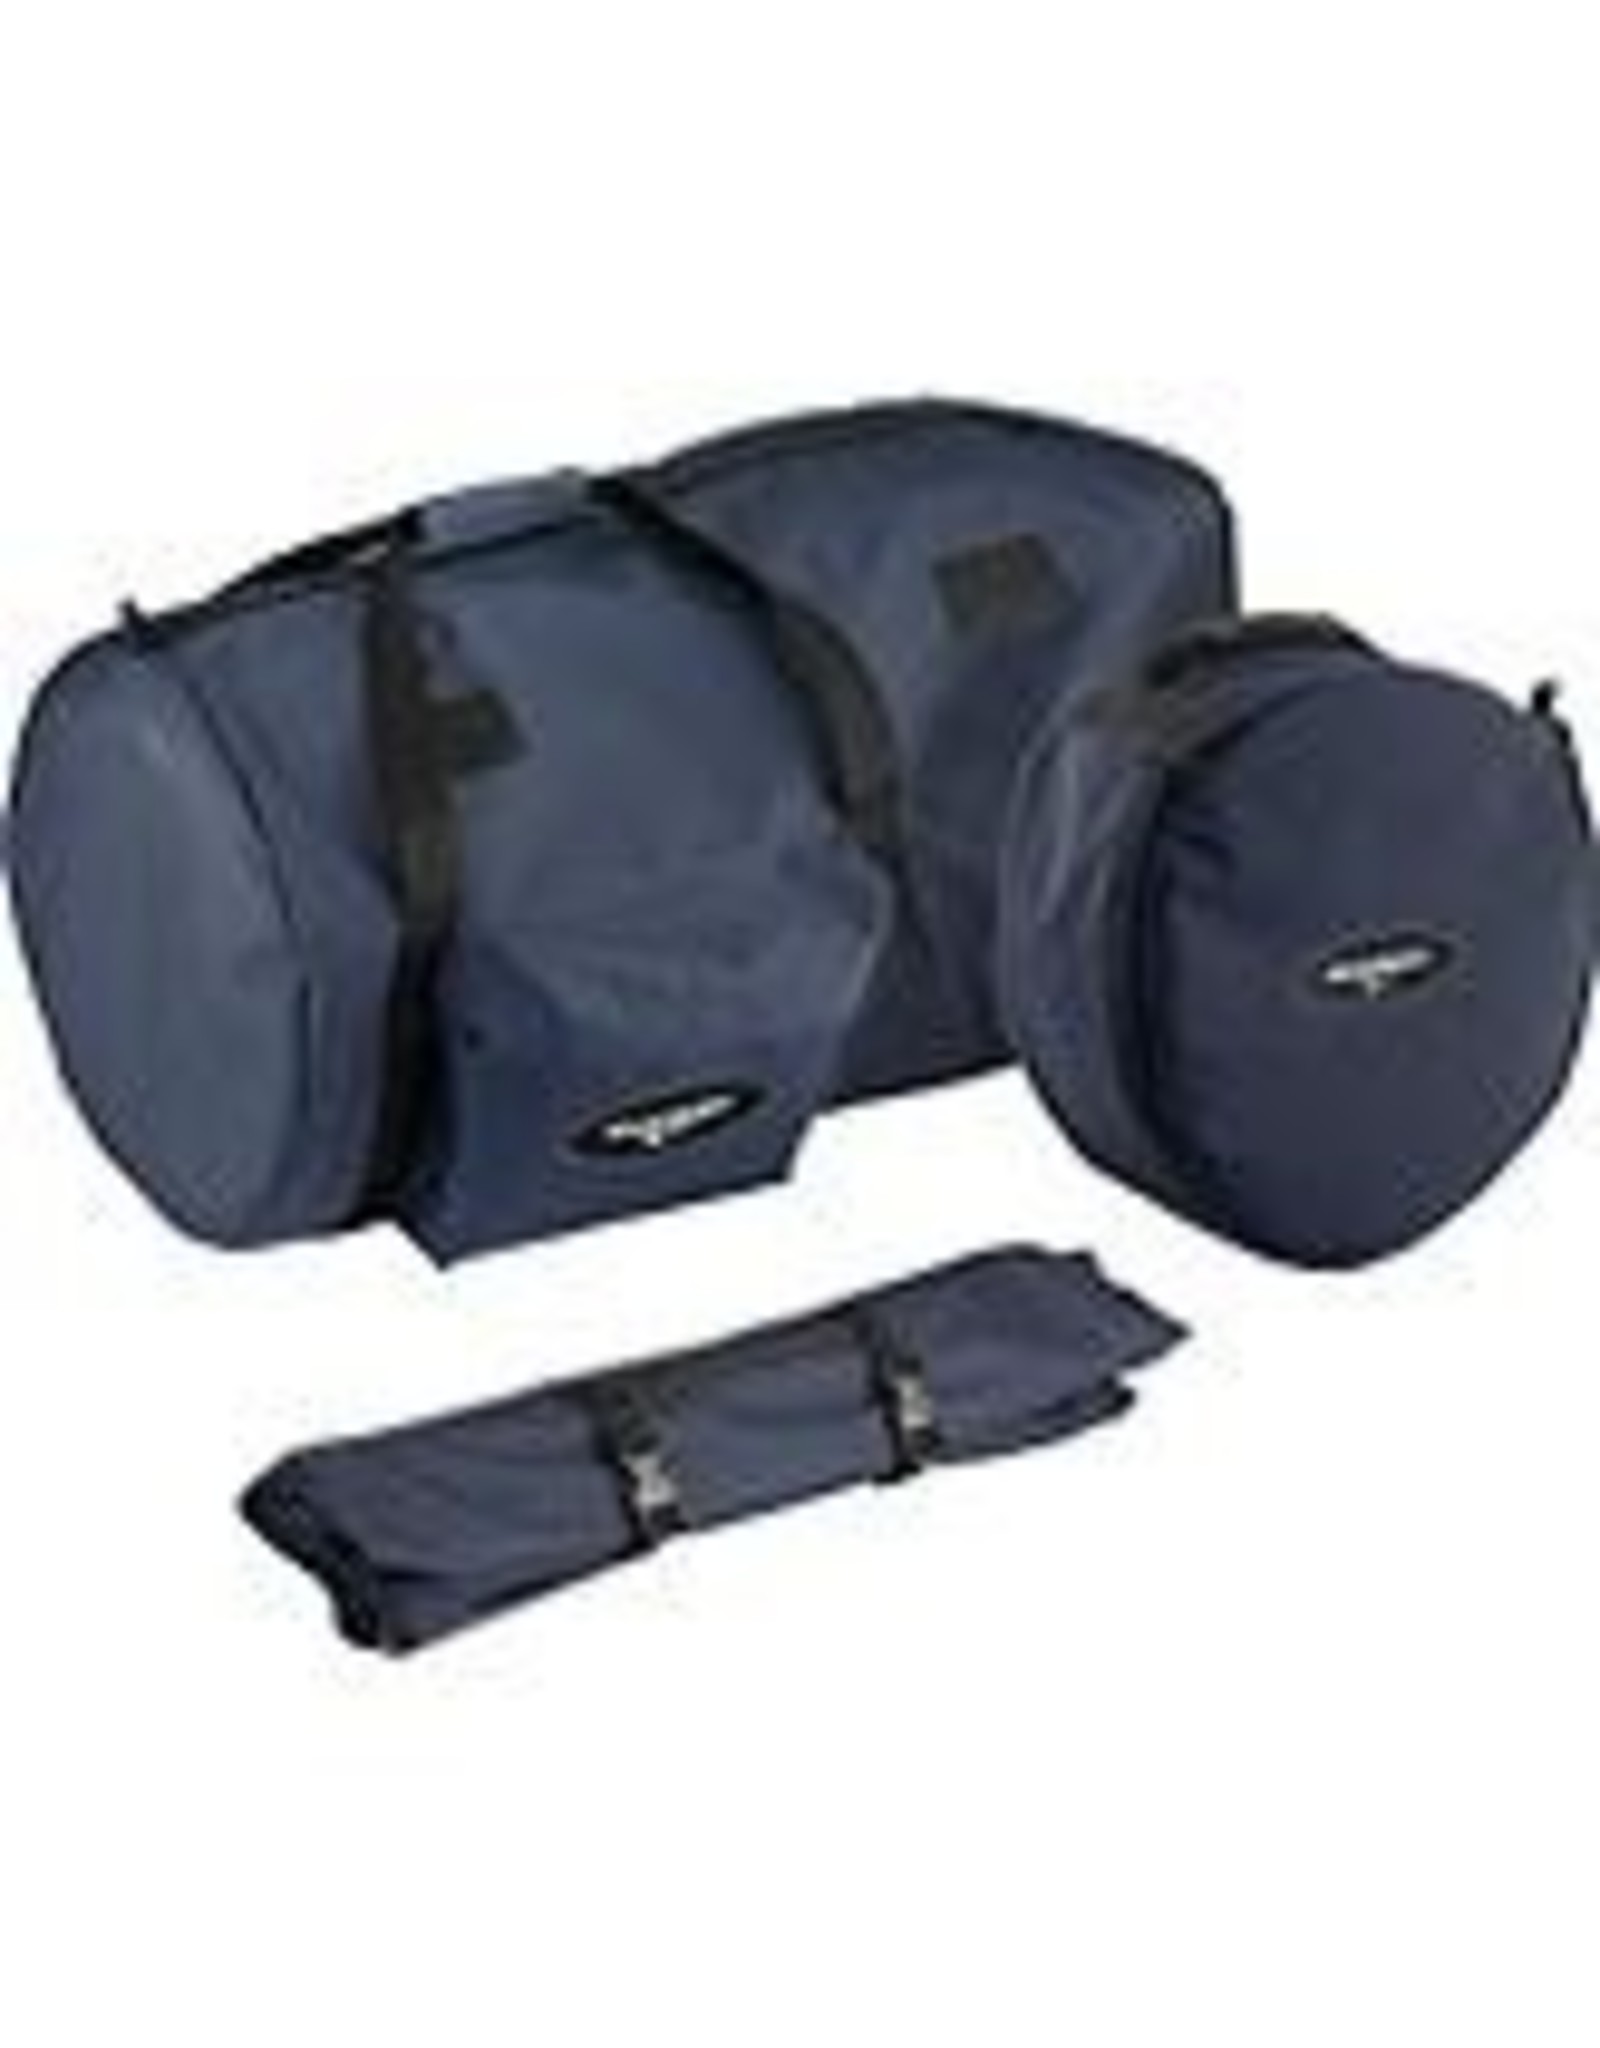 Orion Orion #15094 Set of Skyquest XX12 Padded Telescope Cases